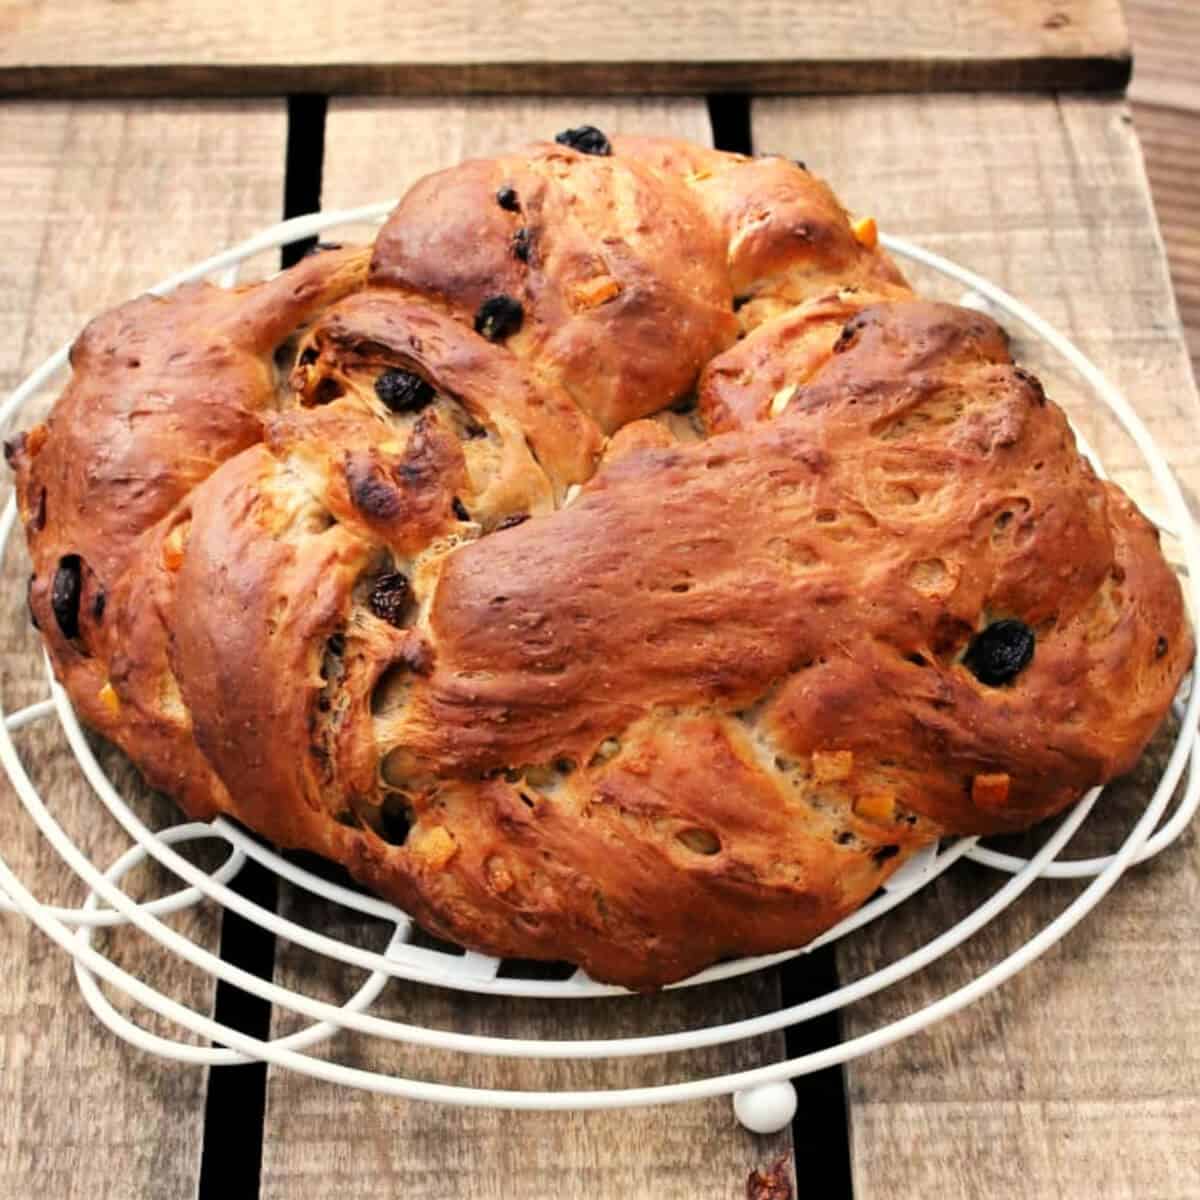 Fruit bread formed into a bread crown shape, on white cooling rack.